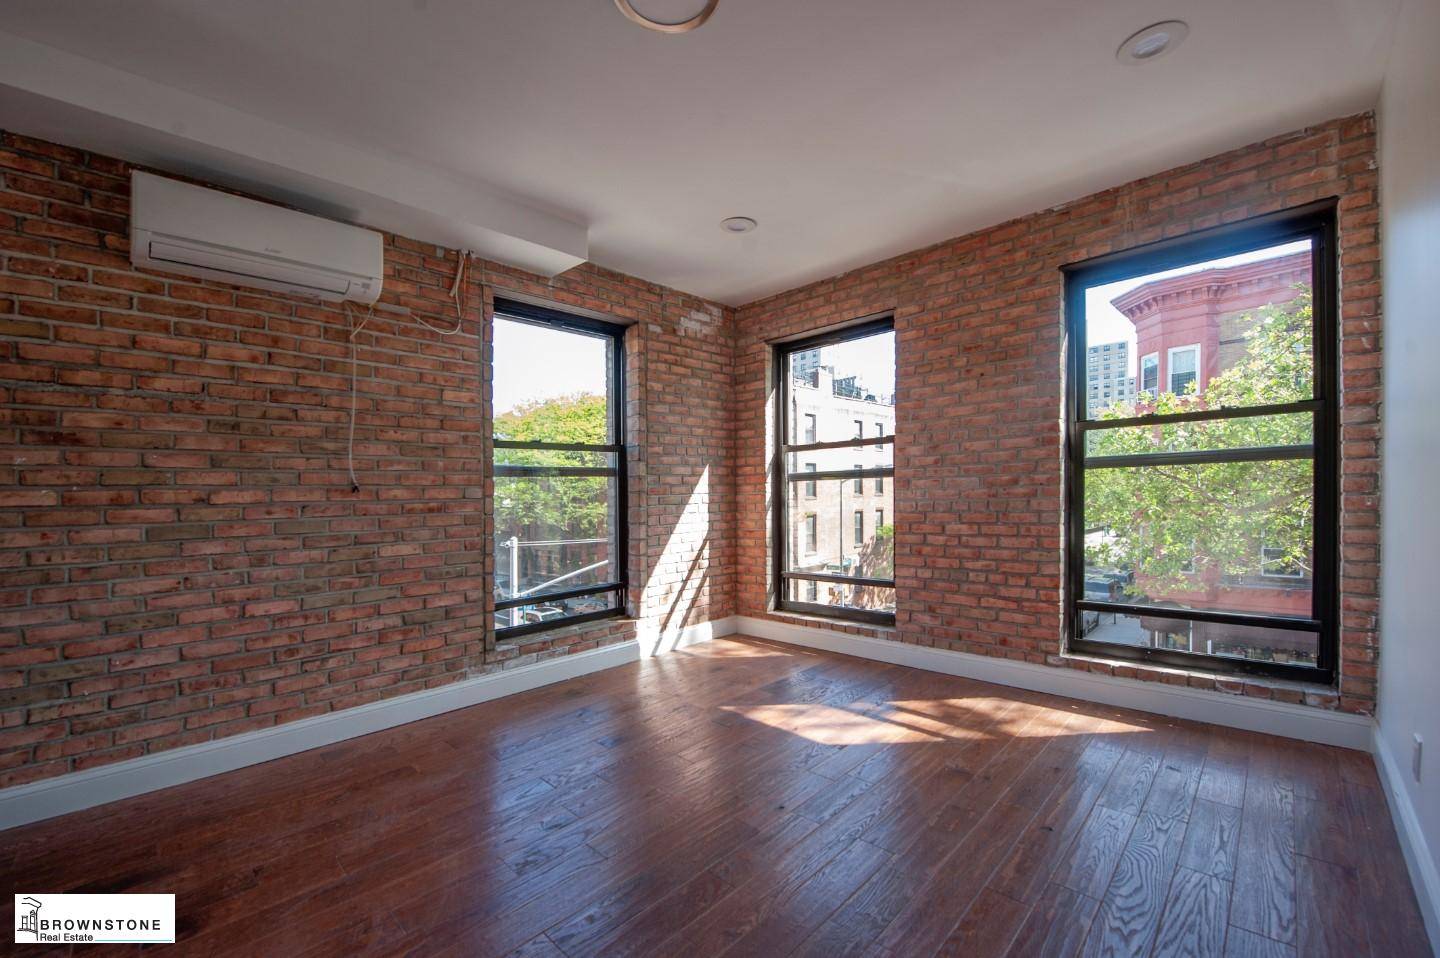 This is a gorgeous triplex located in the heart of Boerum Hill.